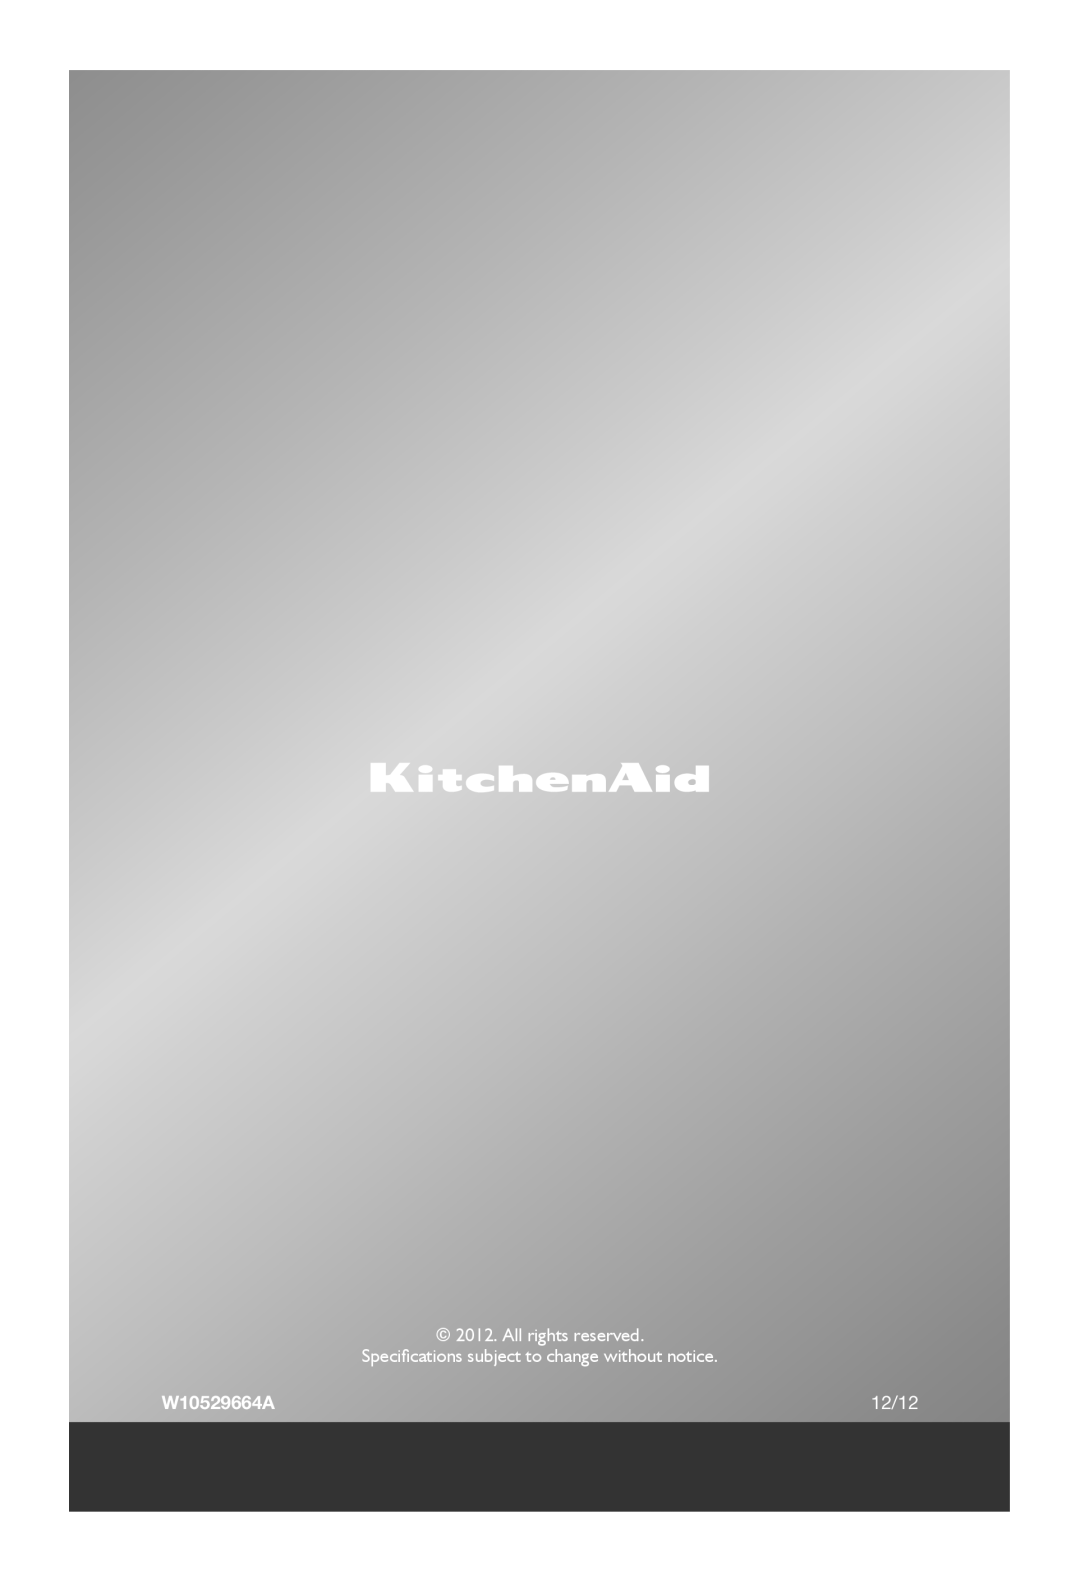 KitchenAid 5KFP1644 manual All rights reserved, Specifications subject to change without notice, W10529664A, 12/12 